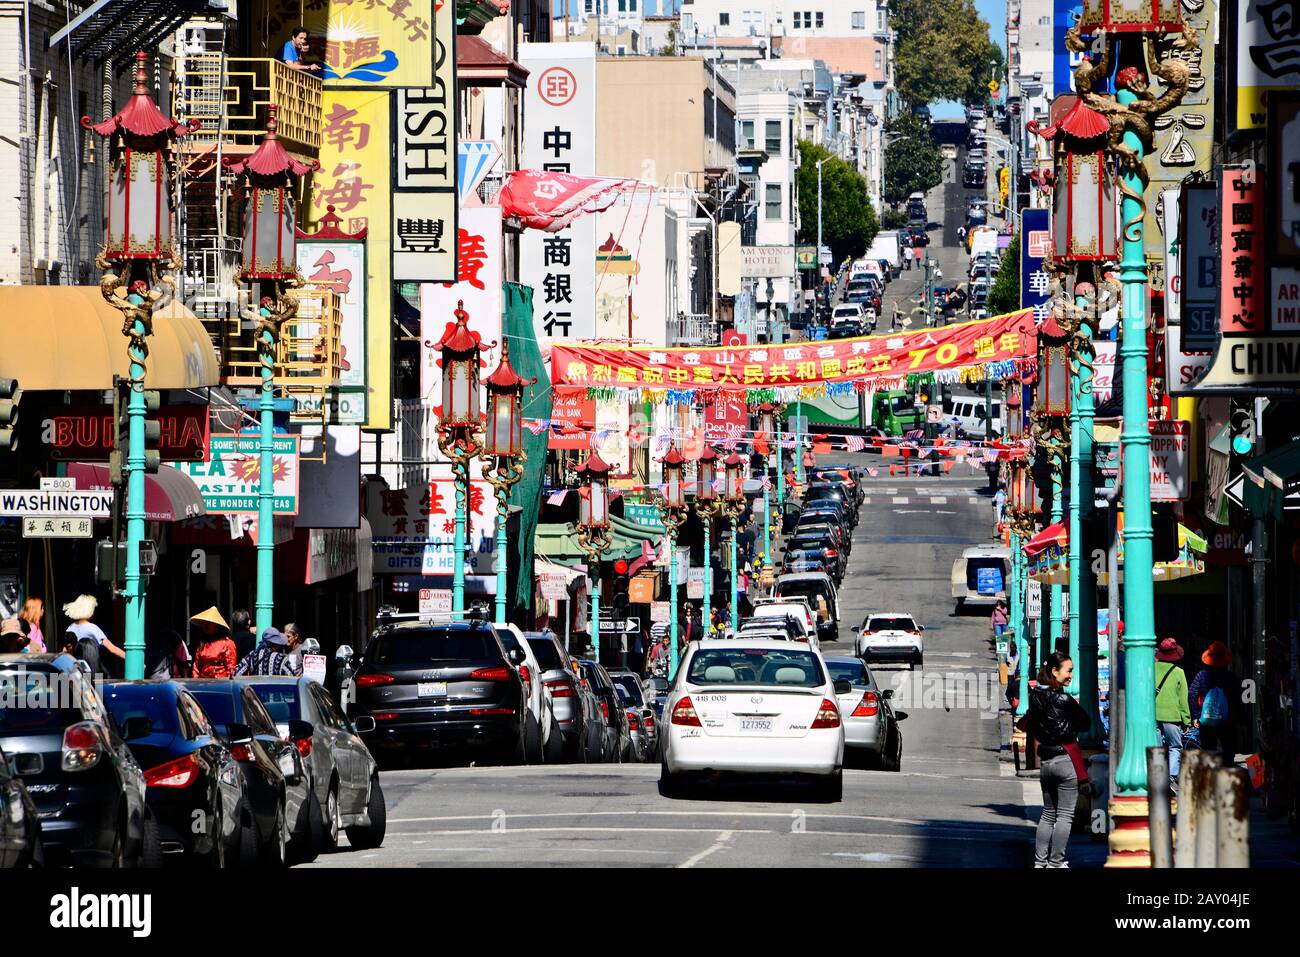 Grant Avenue with Chinese advertising, American and Chinese flags in Chinatown, San Francisco, California, USA Stock Photo